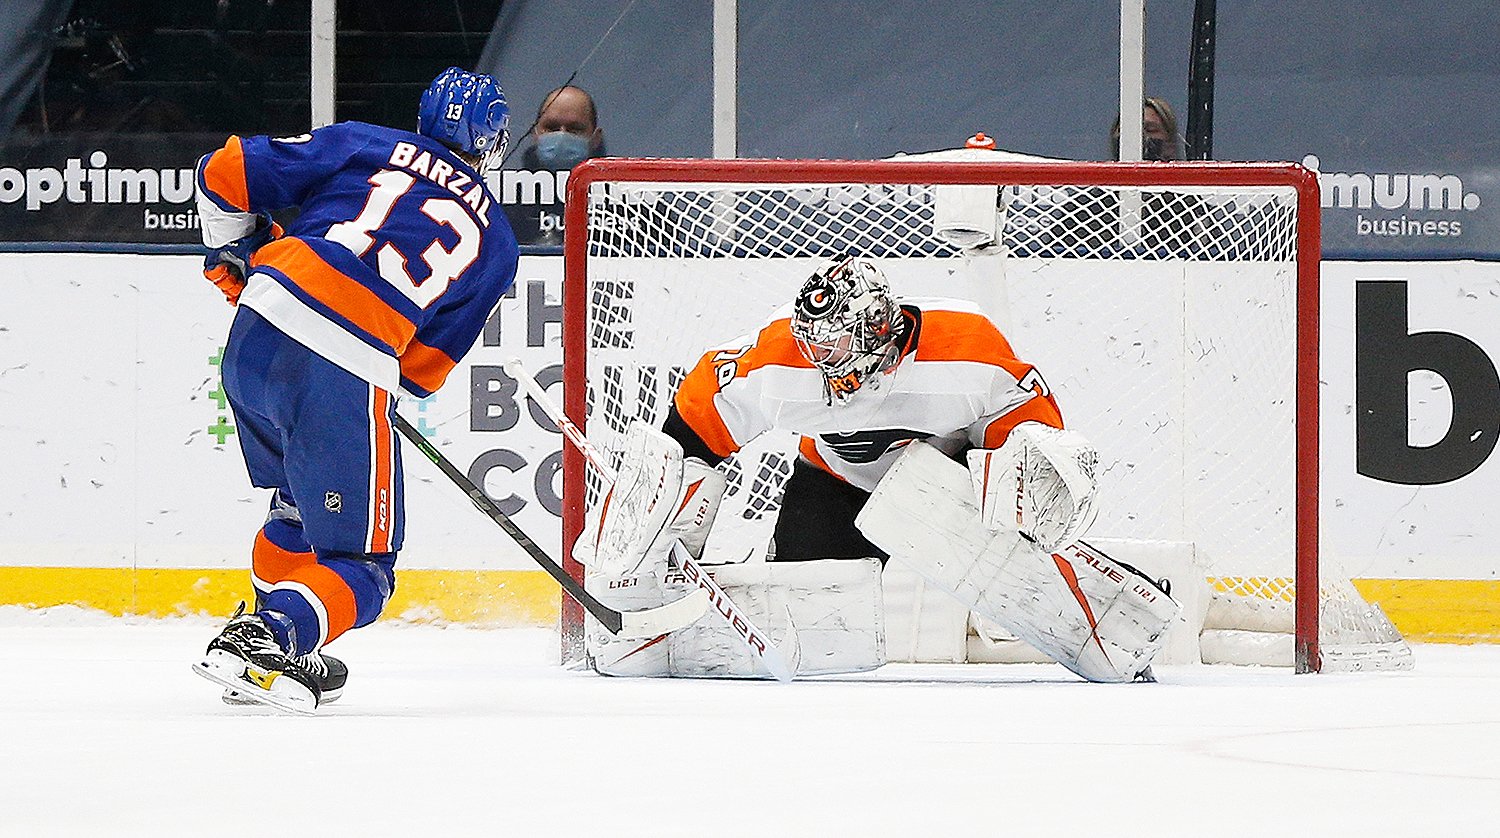 NHL Trade Deadline: With Flyers reflecting on moves, Carter Hart impresses, but the team falls into a shootout against Islanders